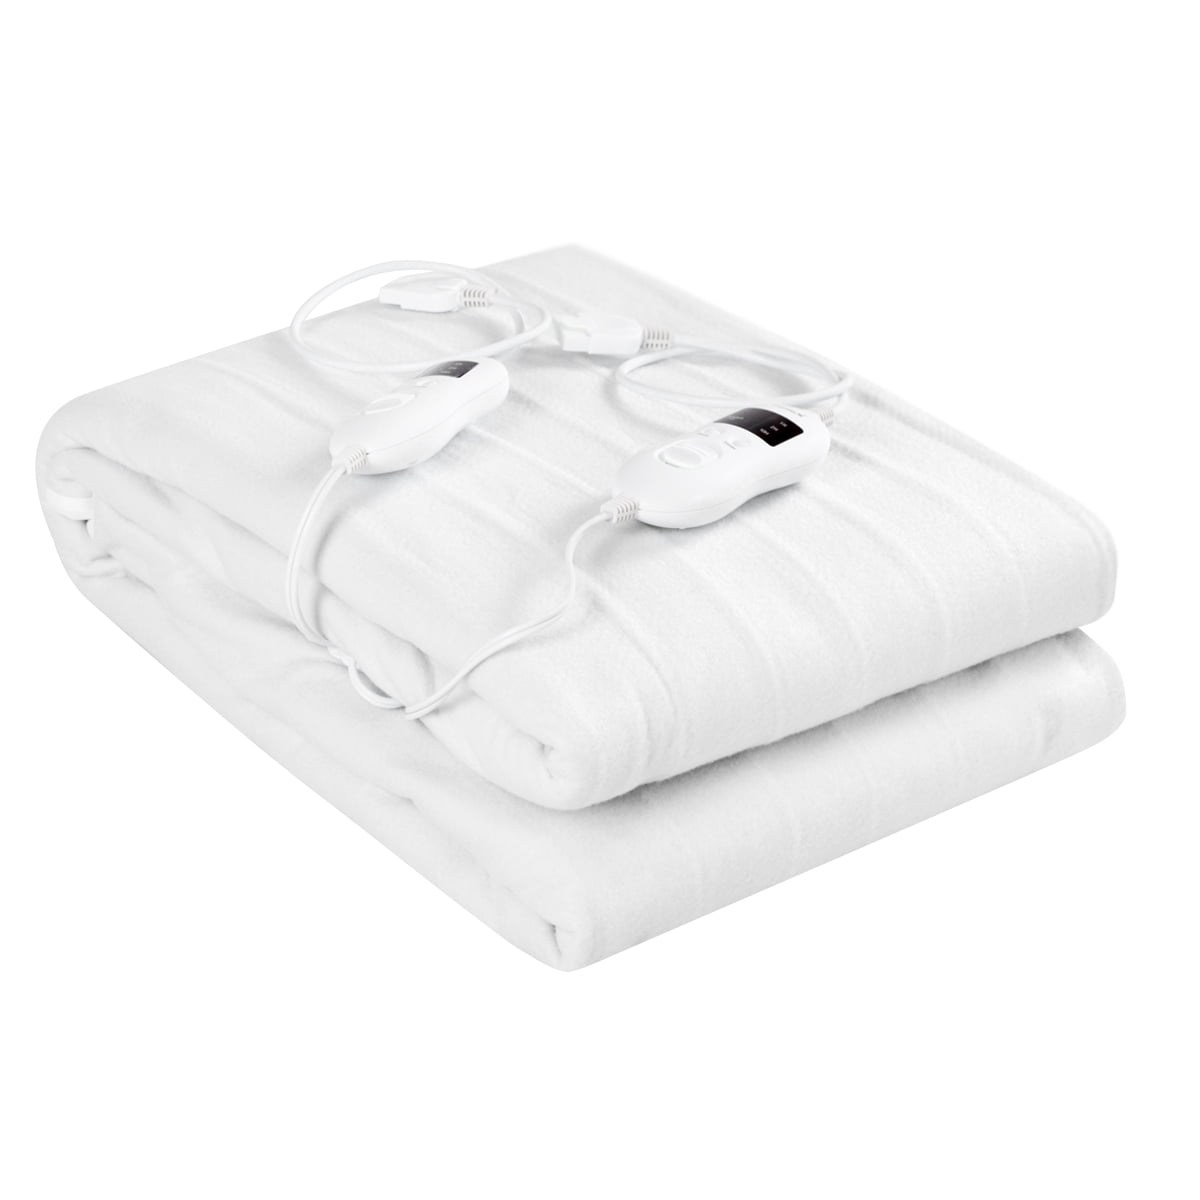 Blanket Electric Heated Mattress Pad Safe 8 Temperatures ...